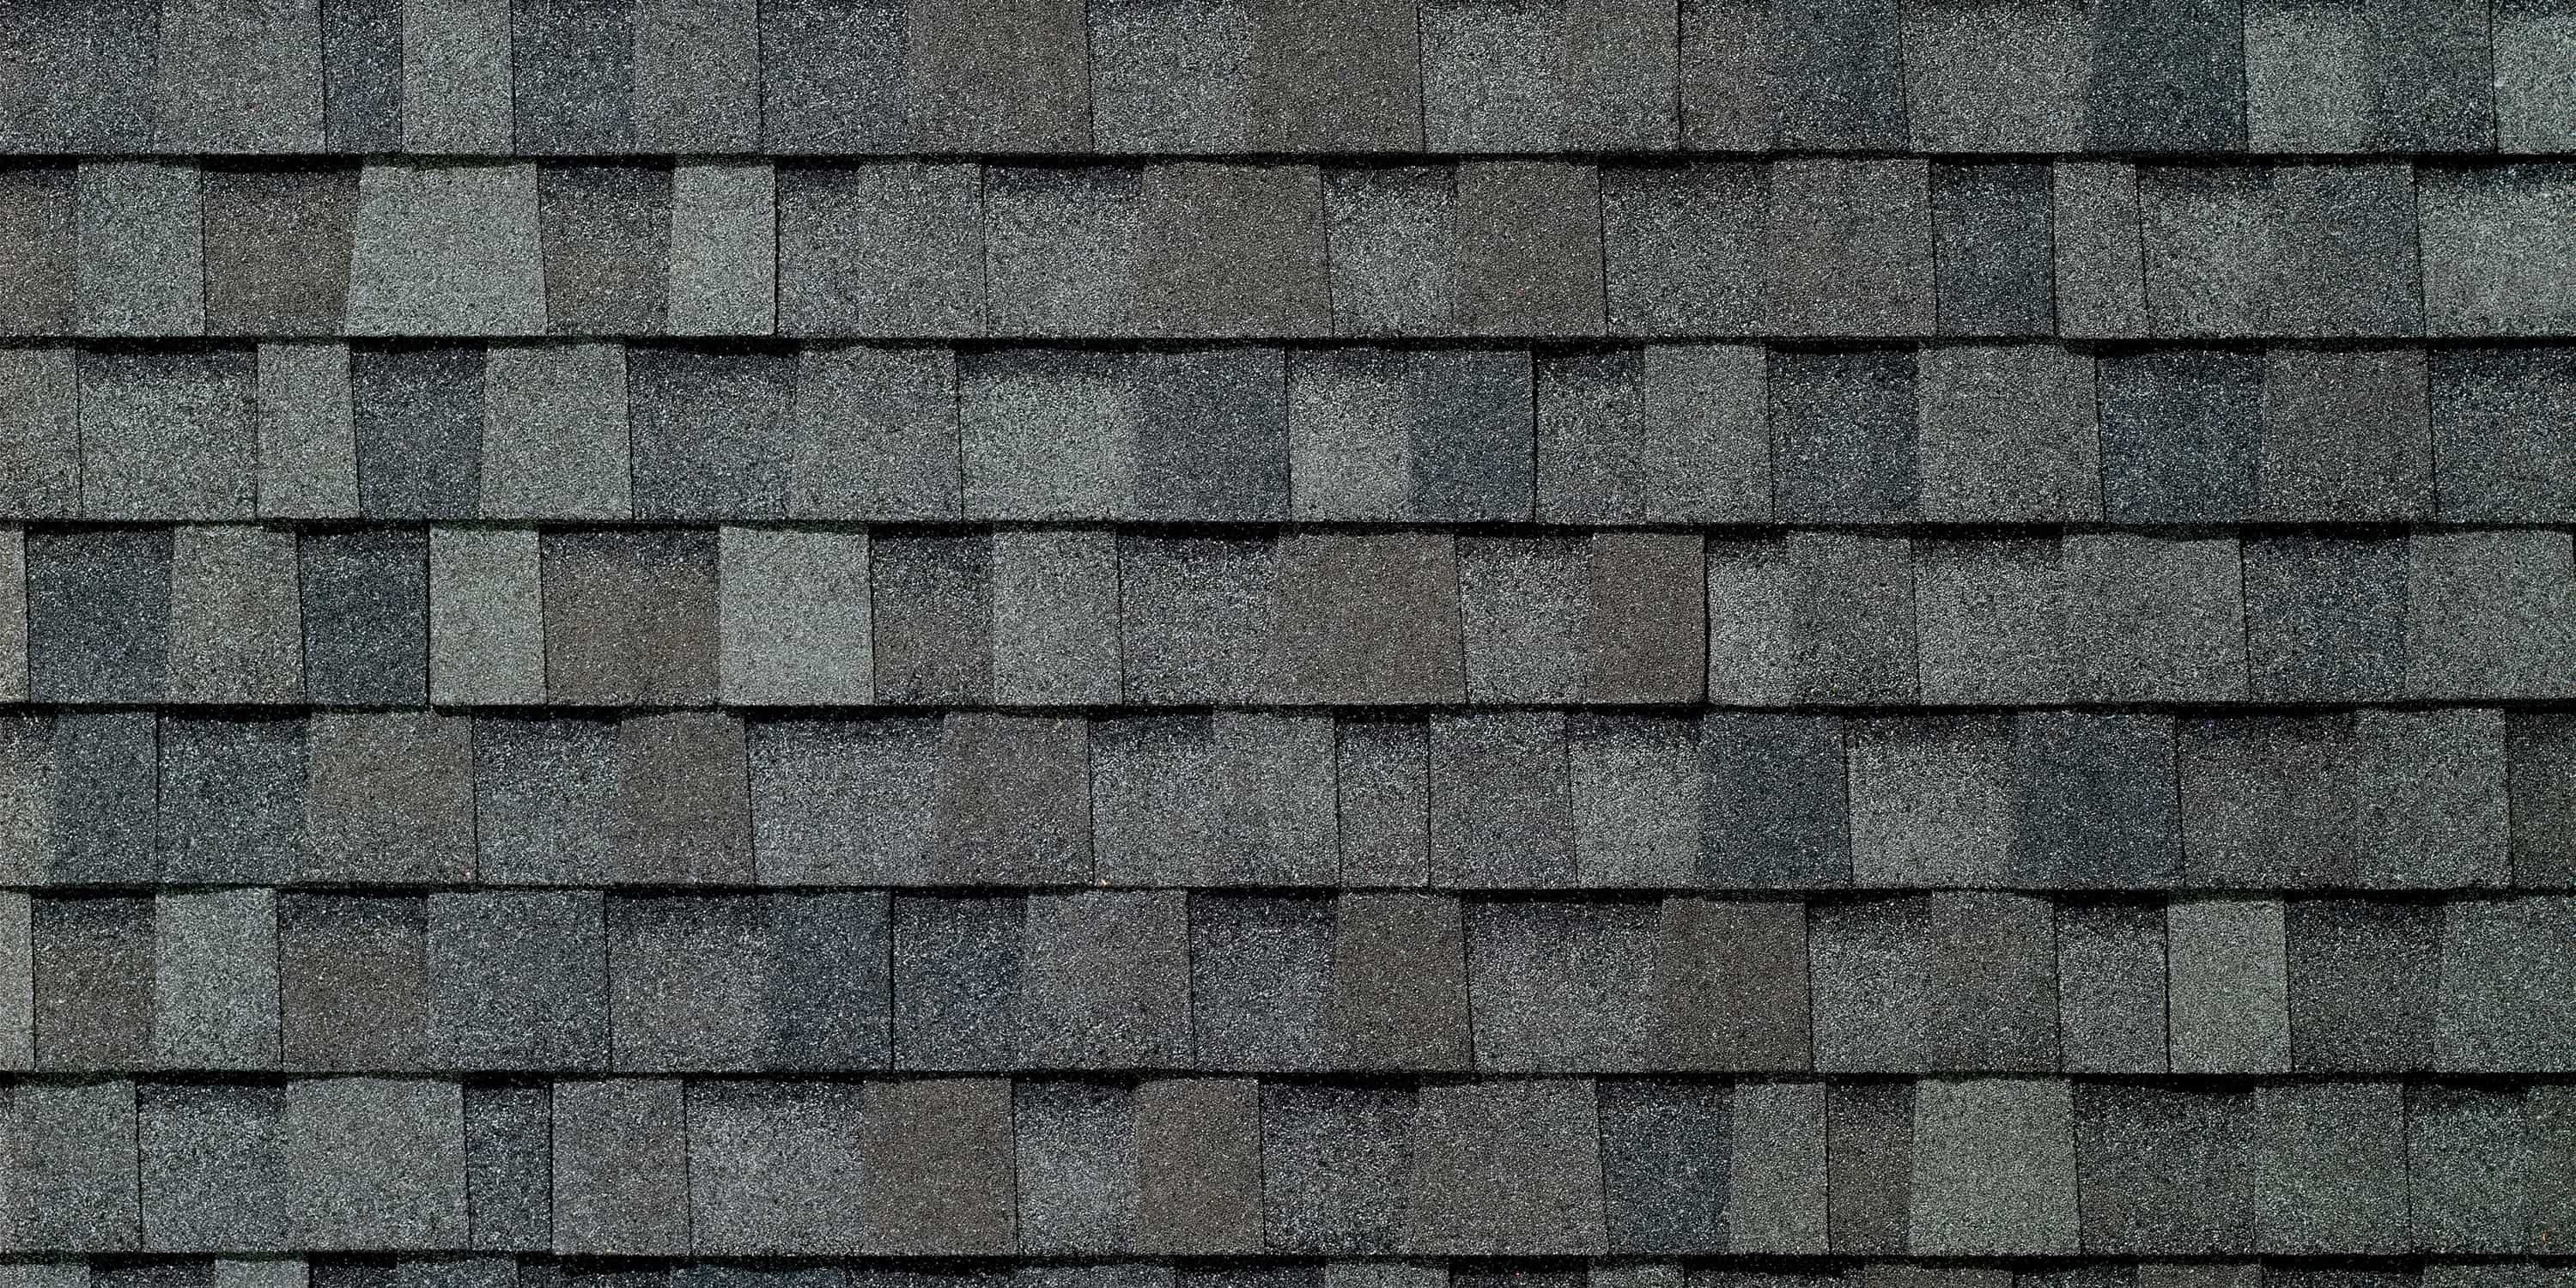 Oyster Gray vs Pewter Gray: Which Roofing Shingle Color Is Better